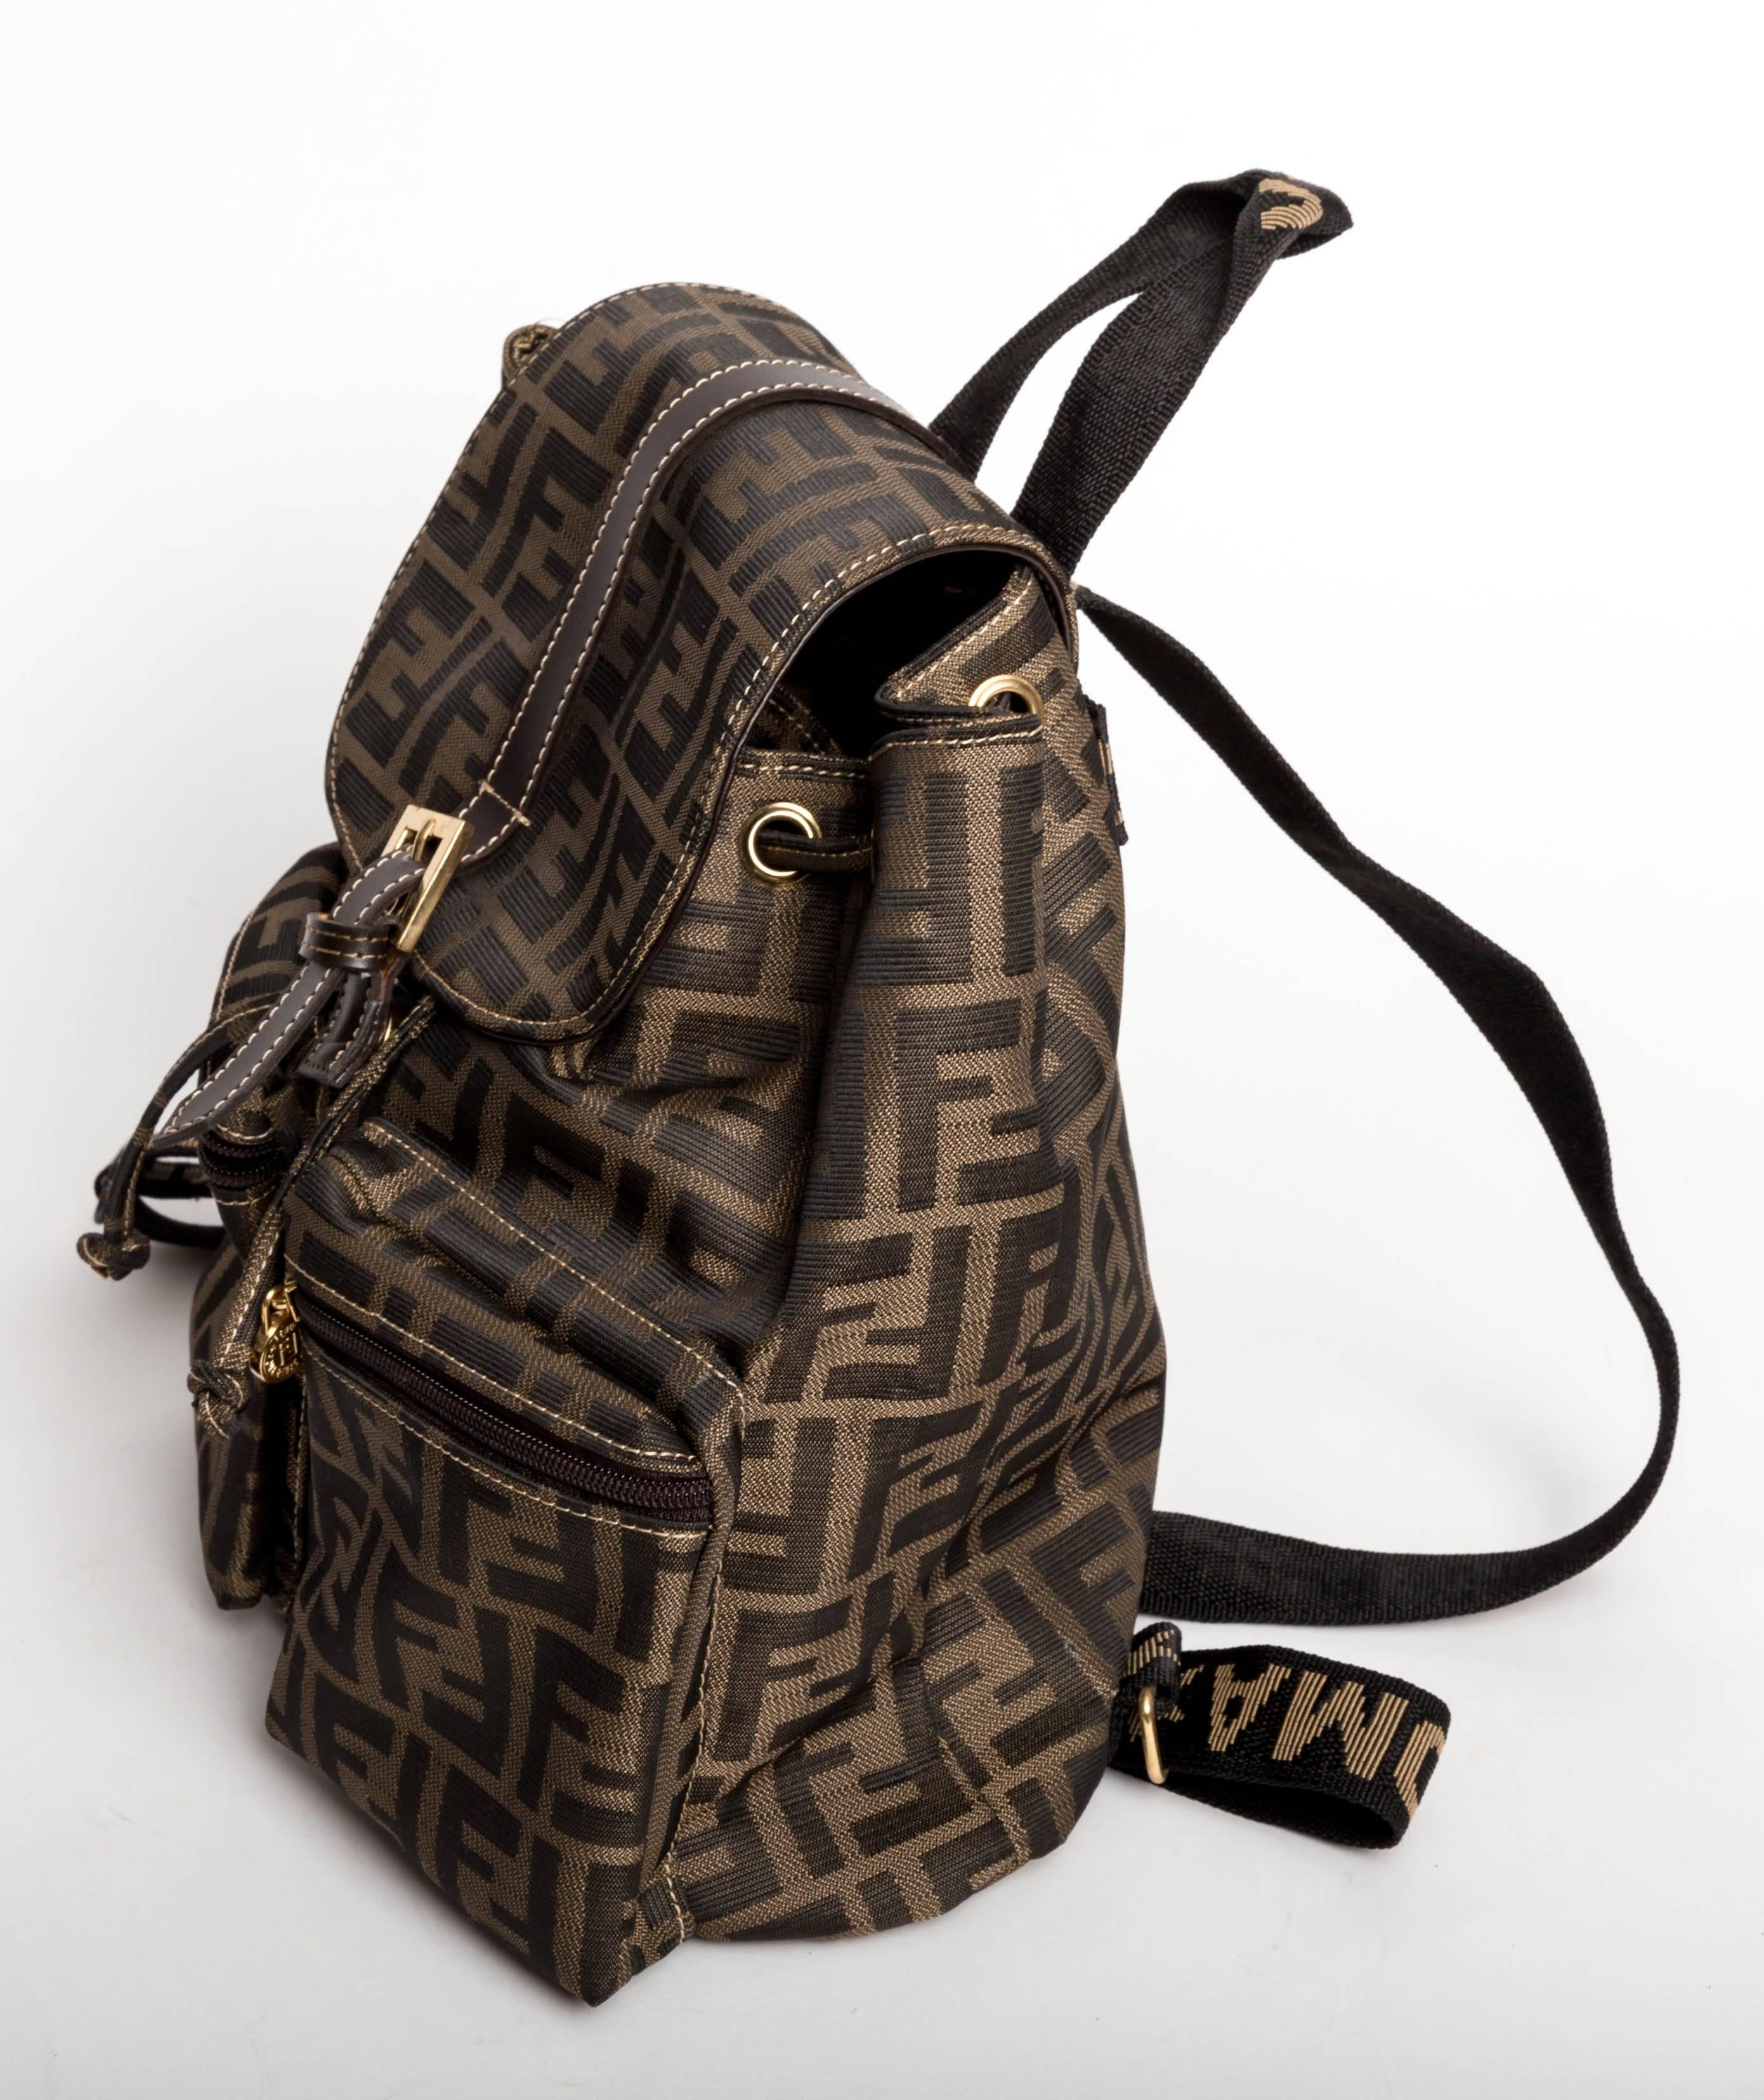 Wonderful Fendi Zucca Backpack.
Canvas straps and brown leather trim accent this fun backpack with two front zip pockets.

